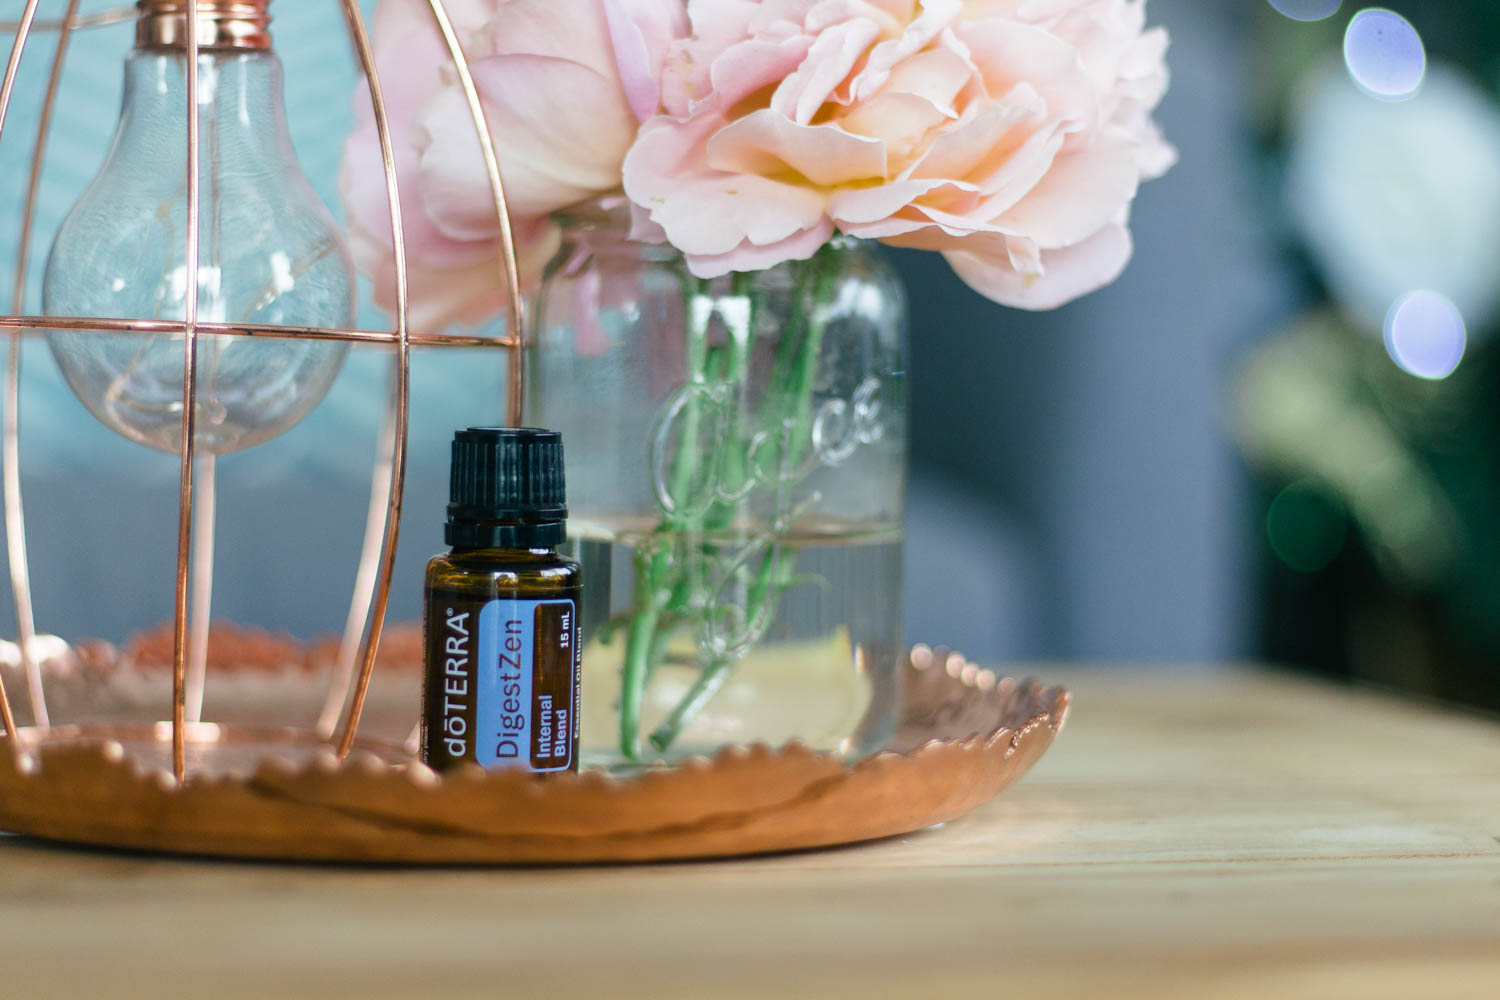 Best Resources to Uplevel your doTERRA Business